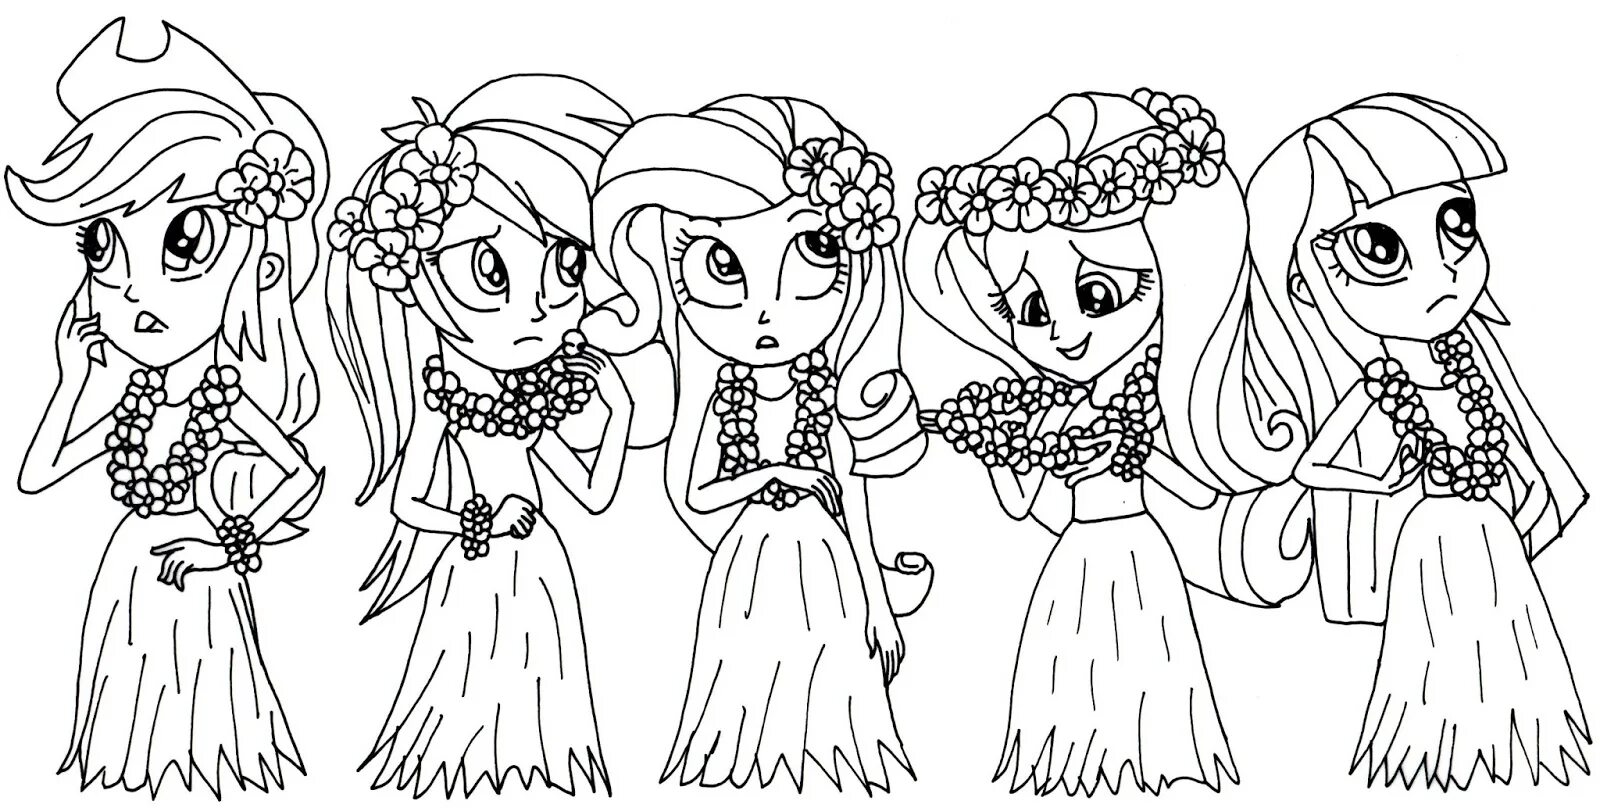 Exotic man pony coloring page